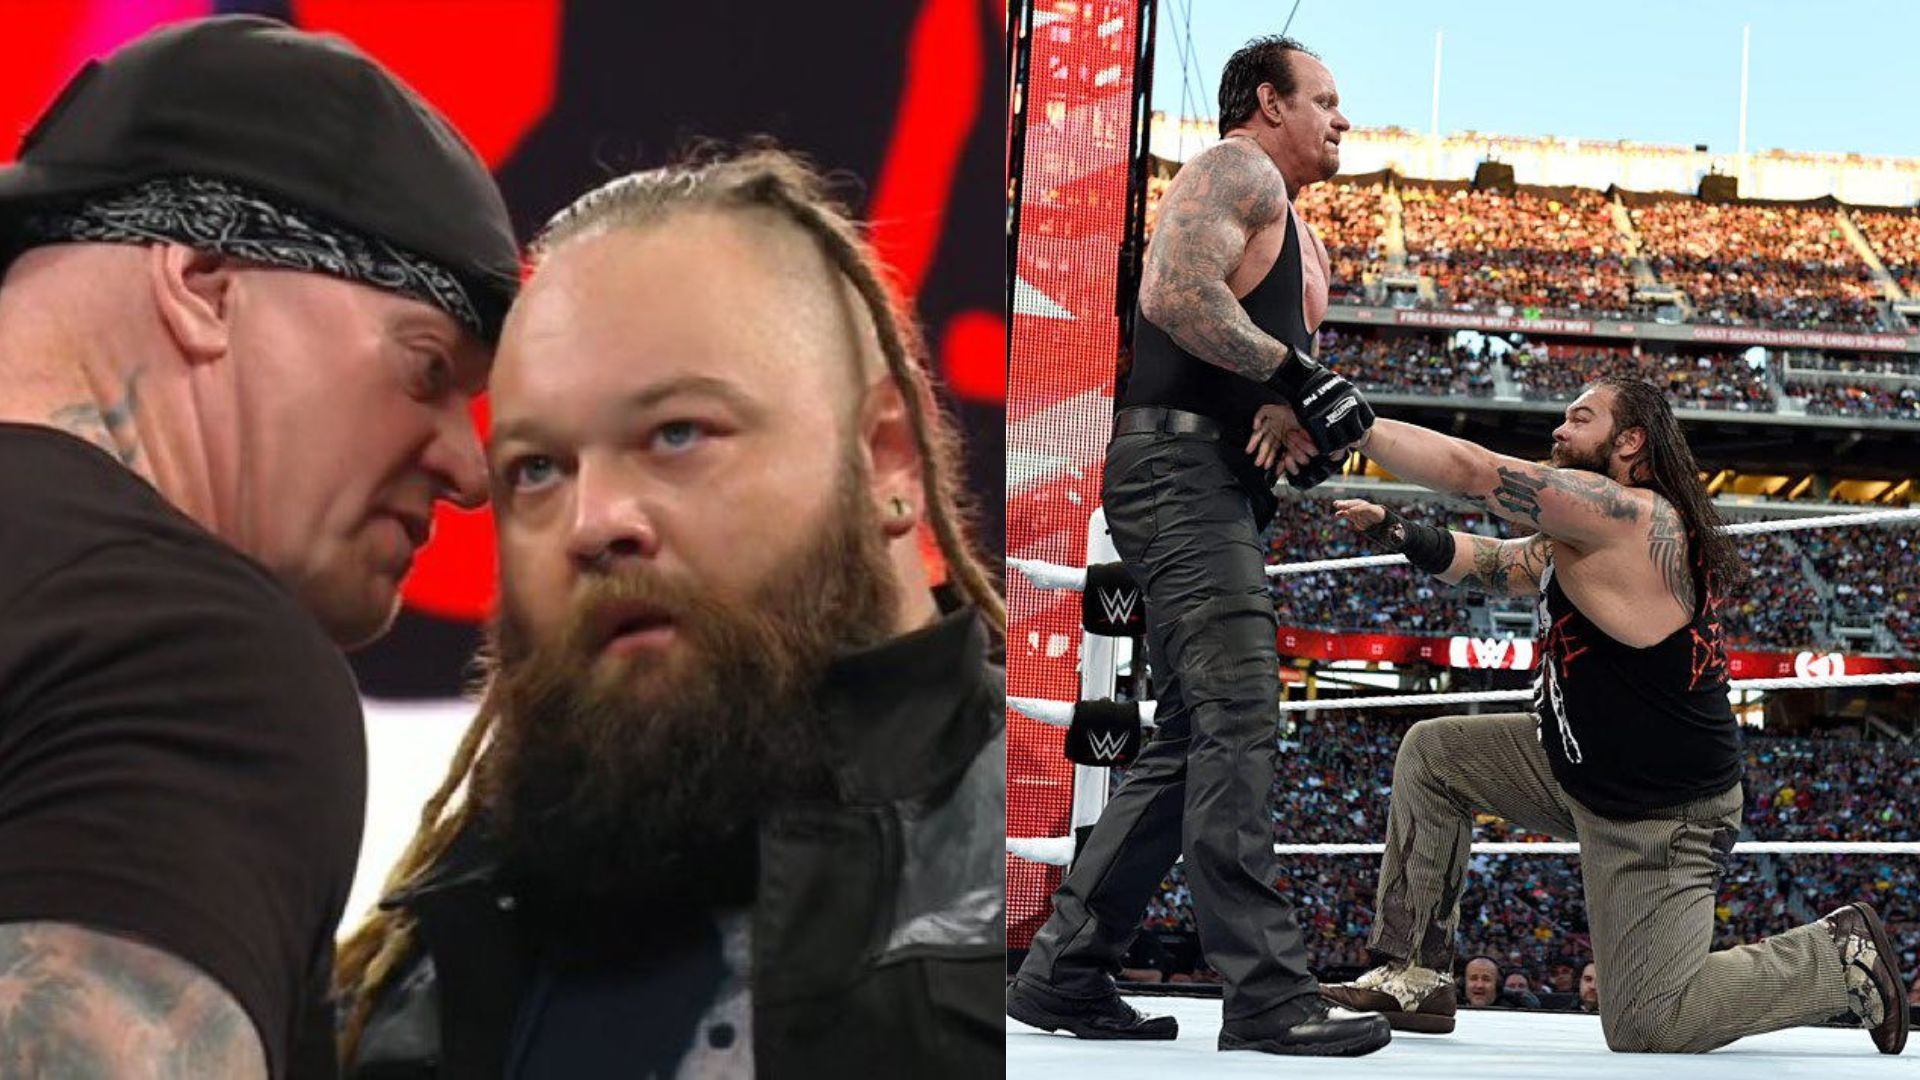 The Undertaker and Bray Wyatt were rivals in the past